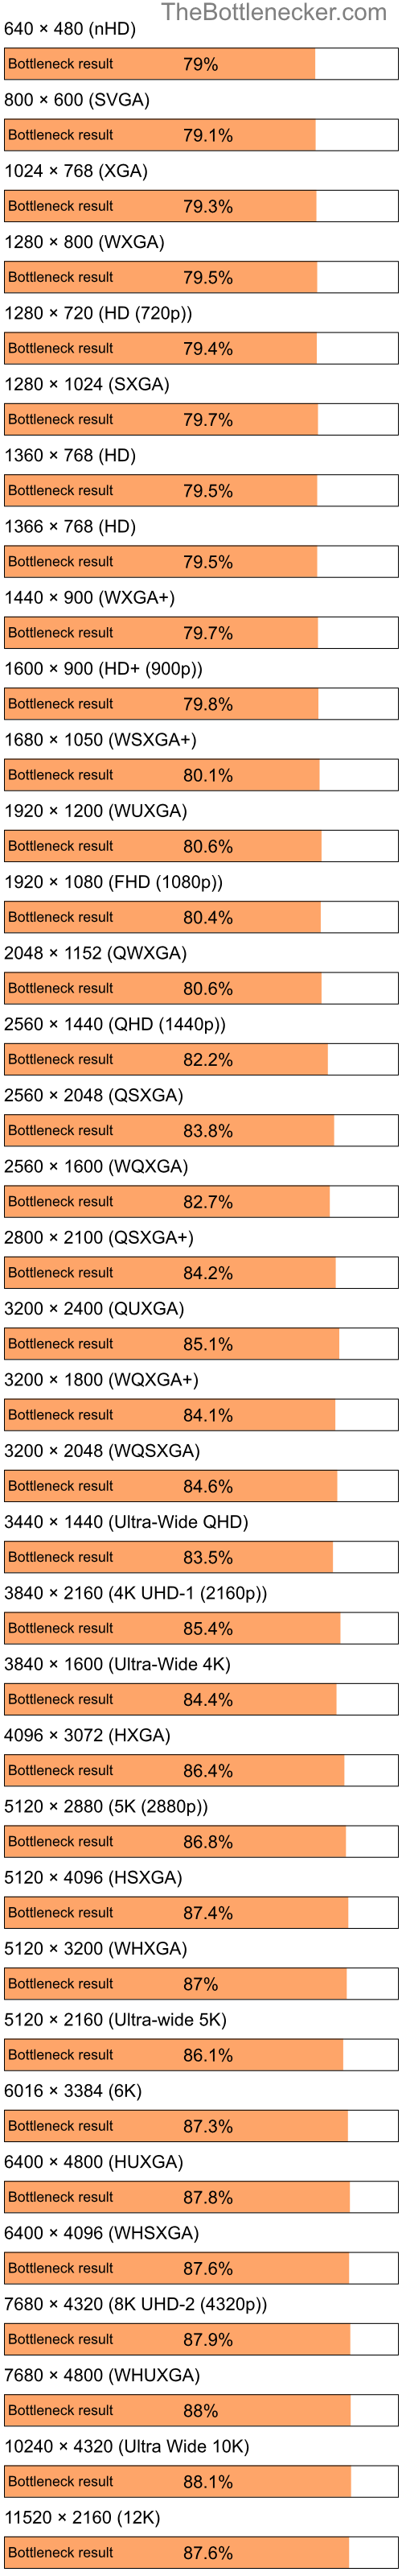 Bottleneck results by resolution for Intel Pentium 4 and AMD Radeon 9550 in7 Days to Die